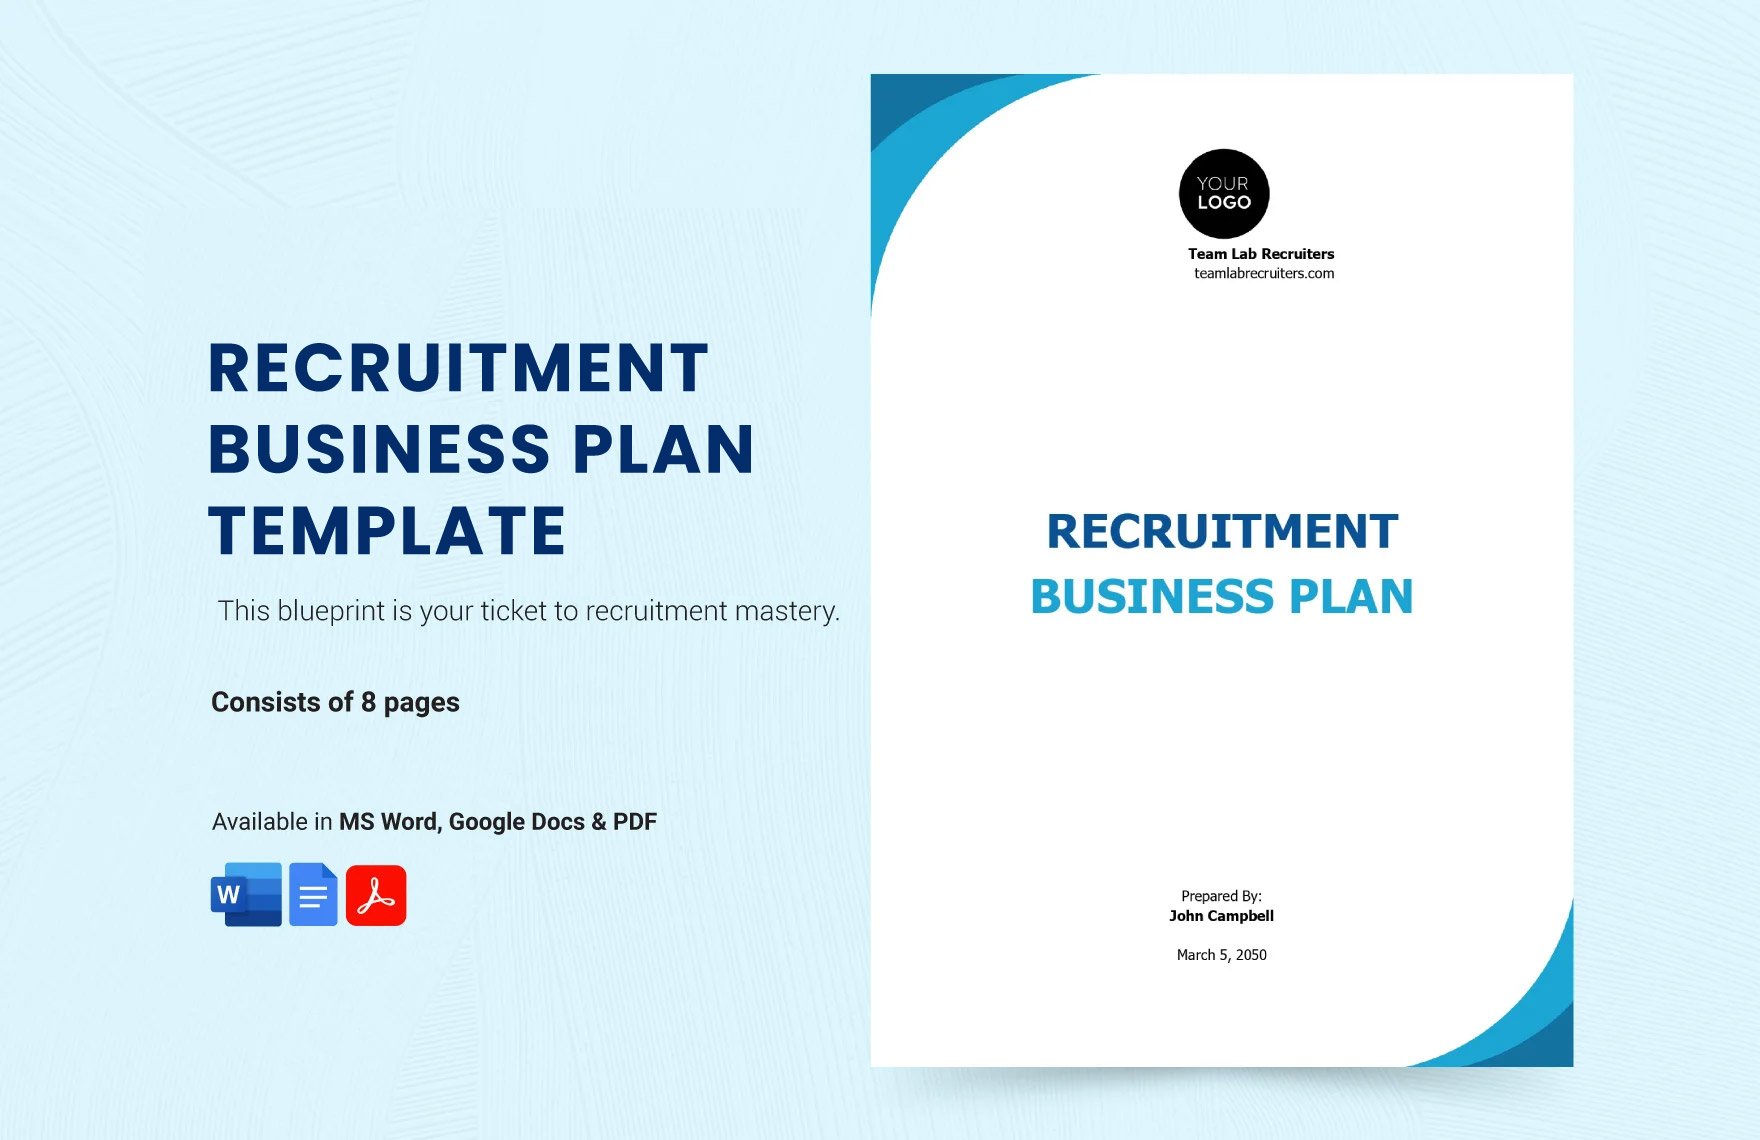 Free Recruitment Business Plan Template in Word, Google Docs, PDF